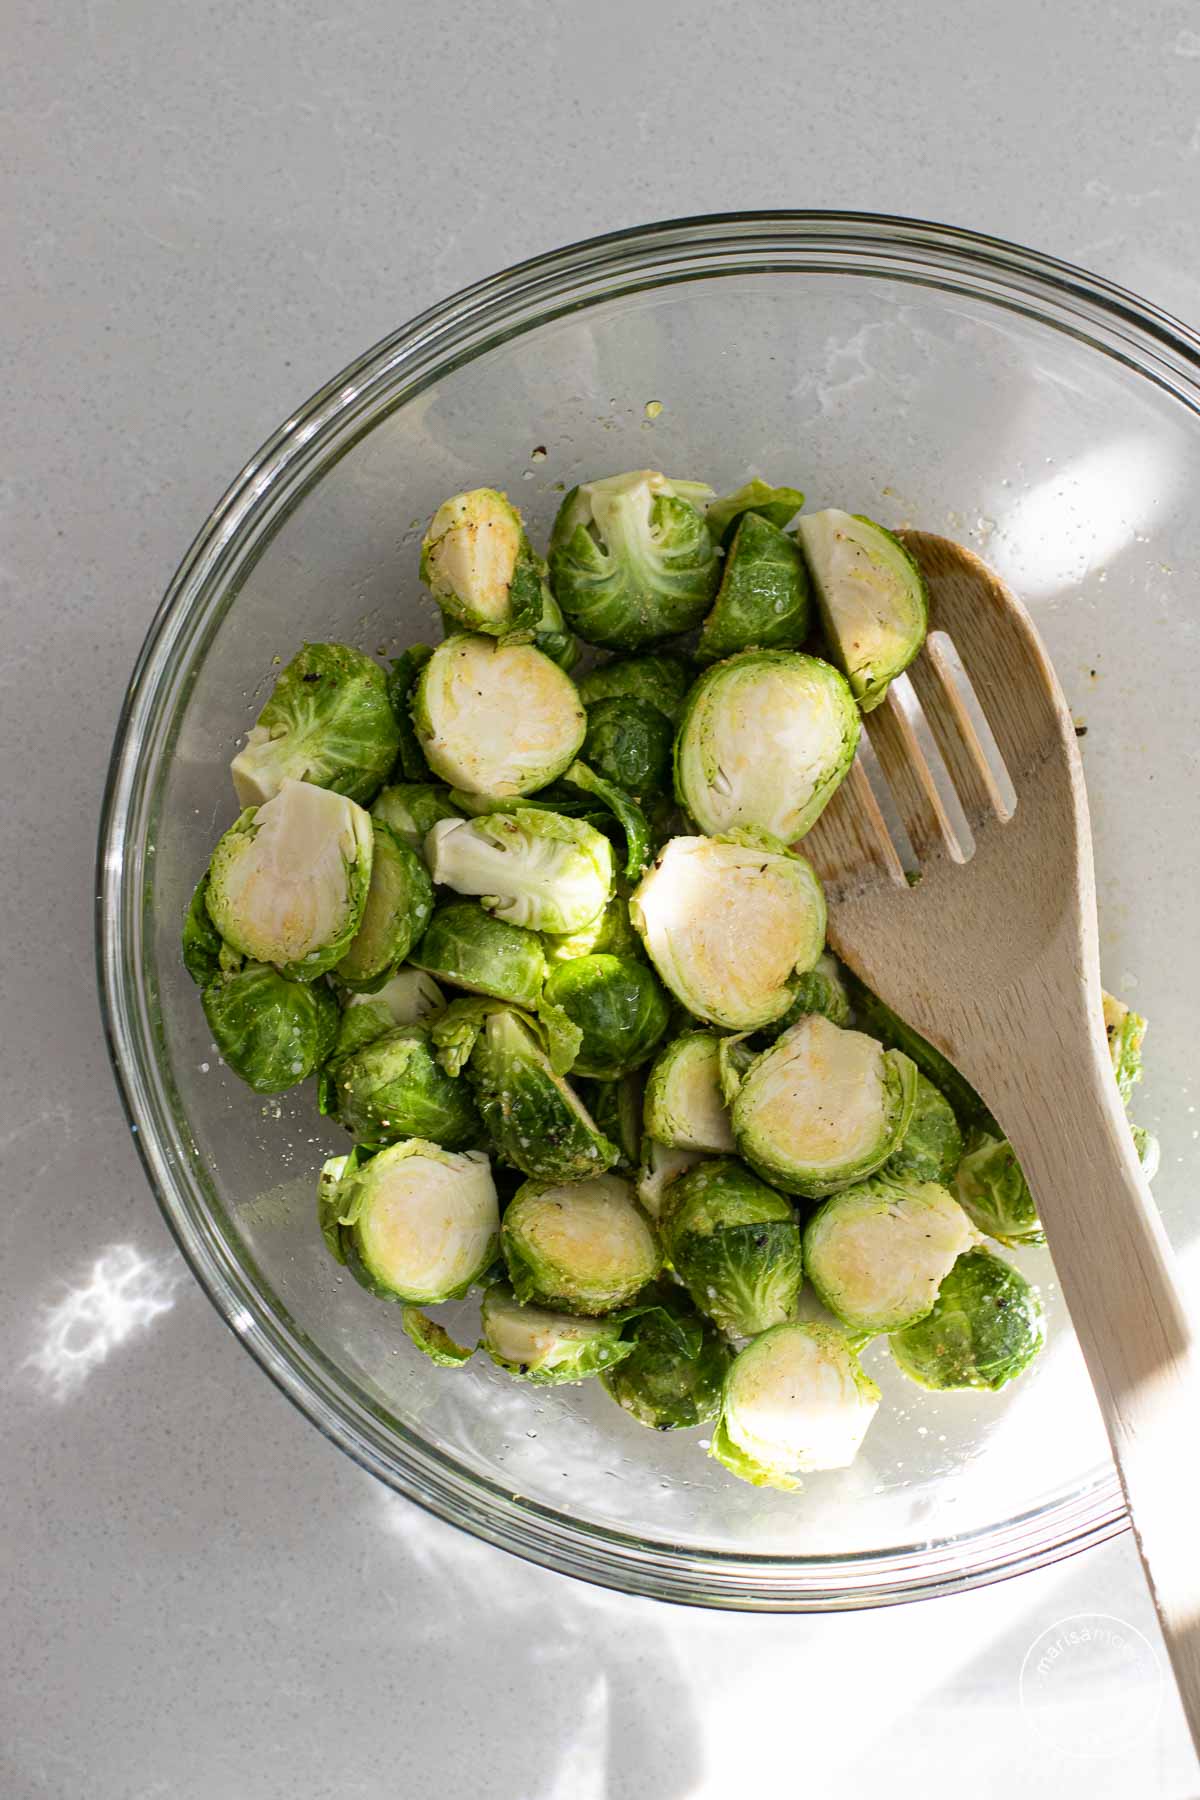 Halved brussels sprouts in a glass bowl.